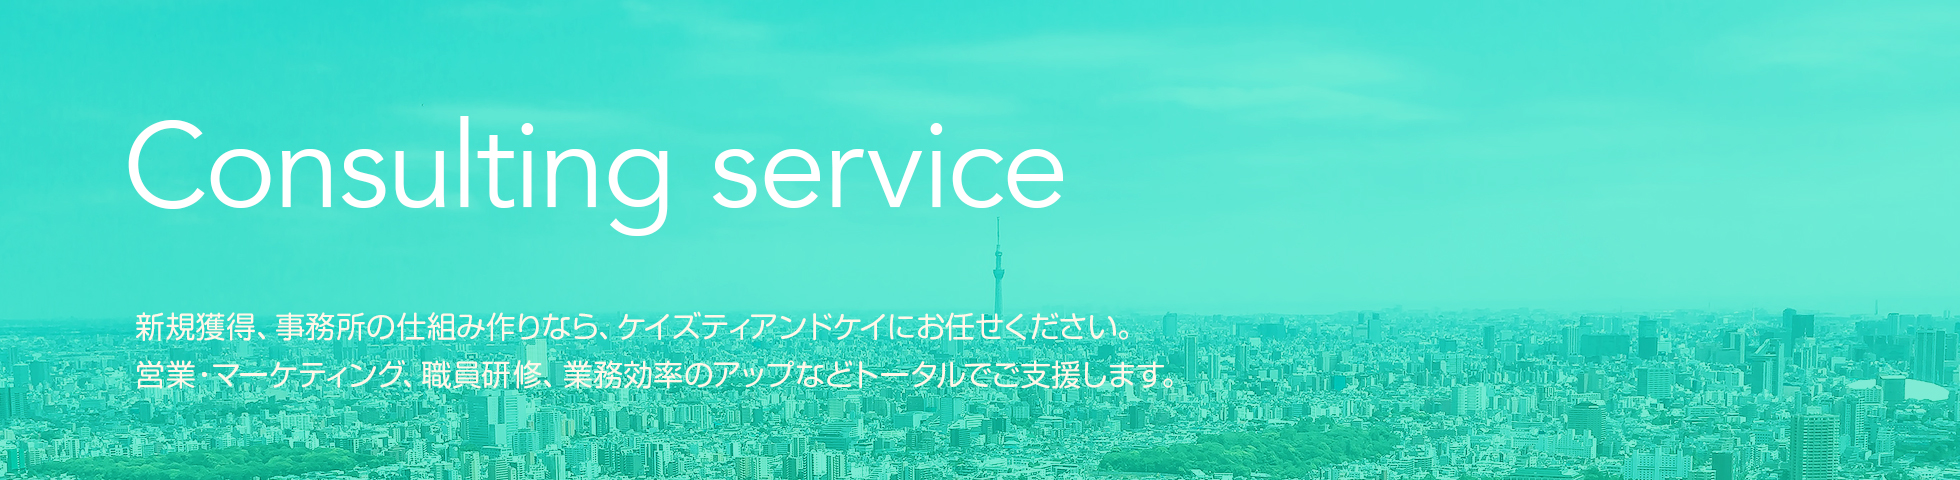 Consulting service コンサルティングサービス